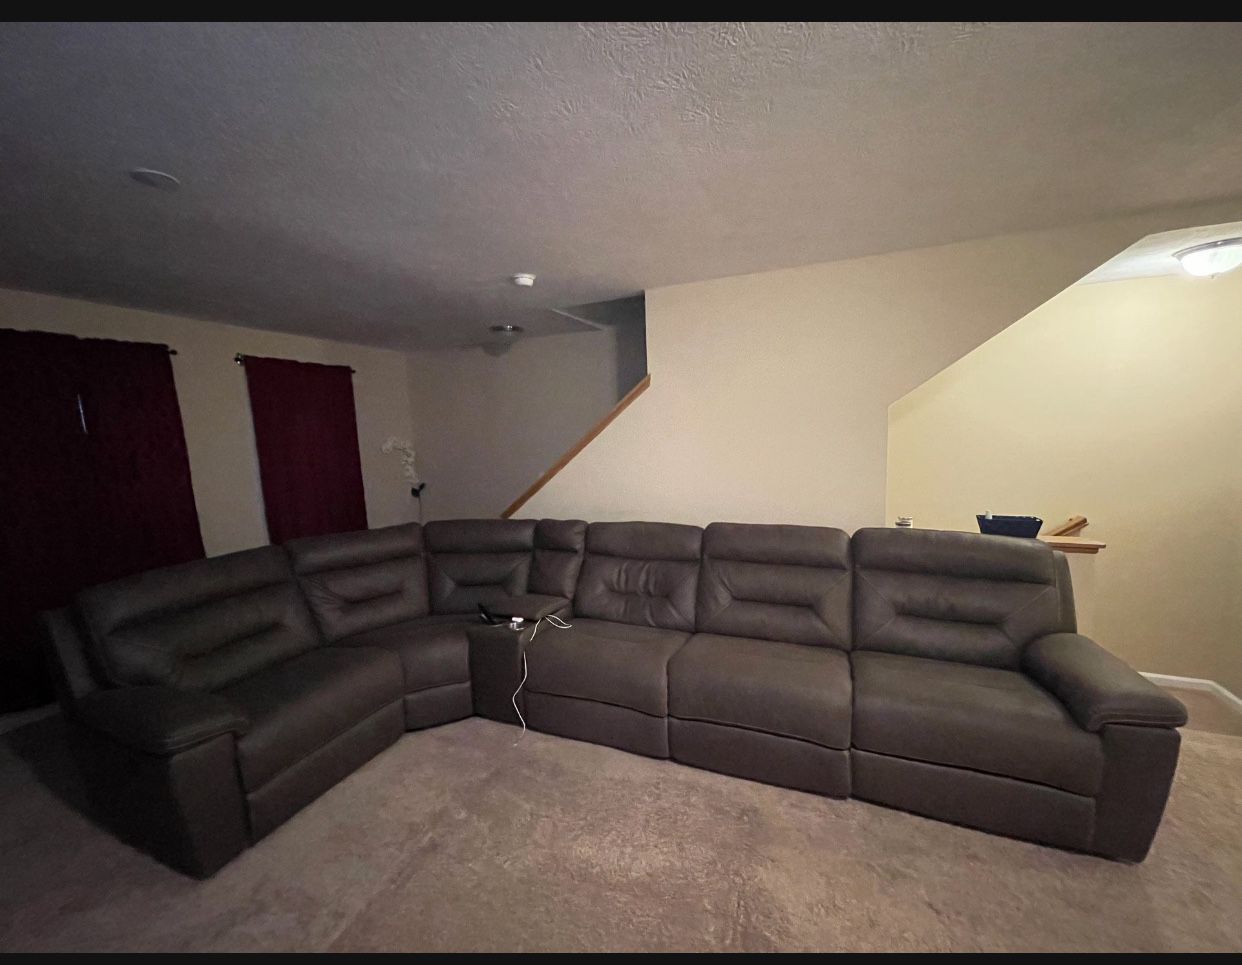 Sectional Sofa from Costco